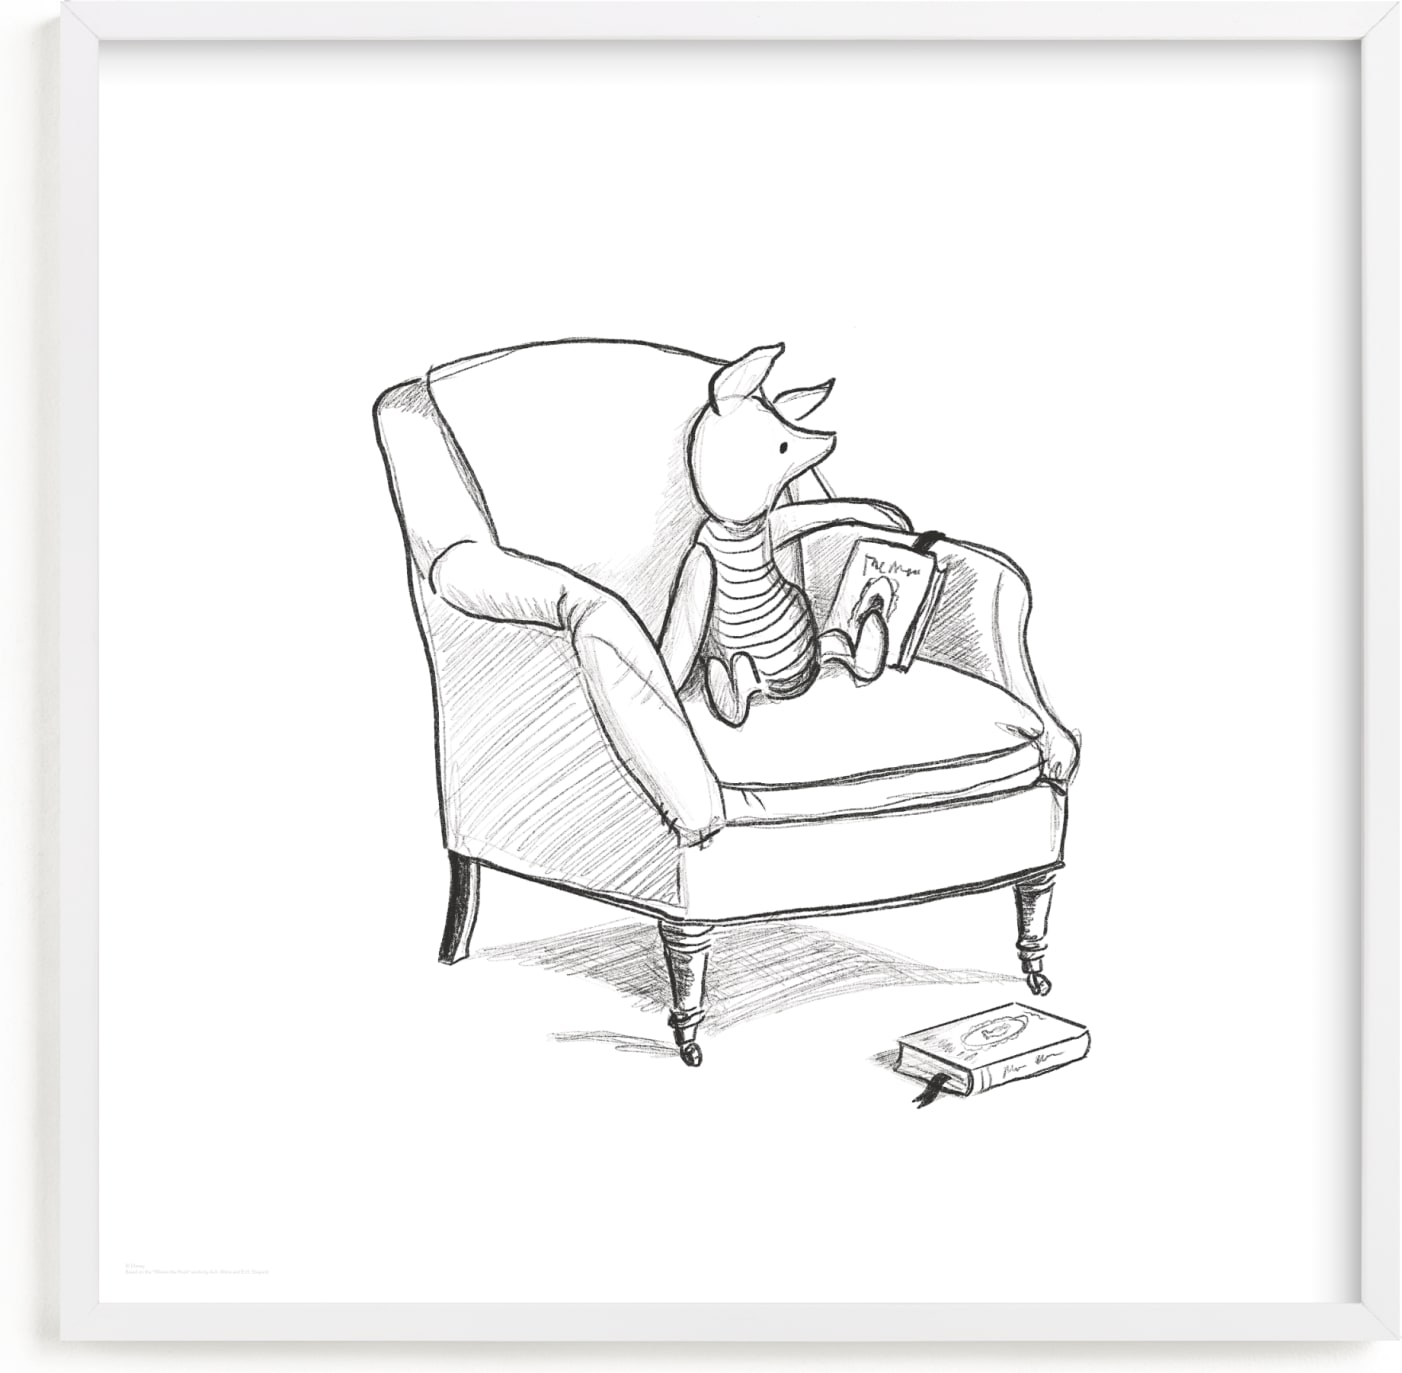 This is a black and white disney art by Stefanie Lane called Piglet Lounging.